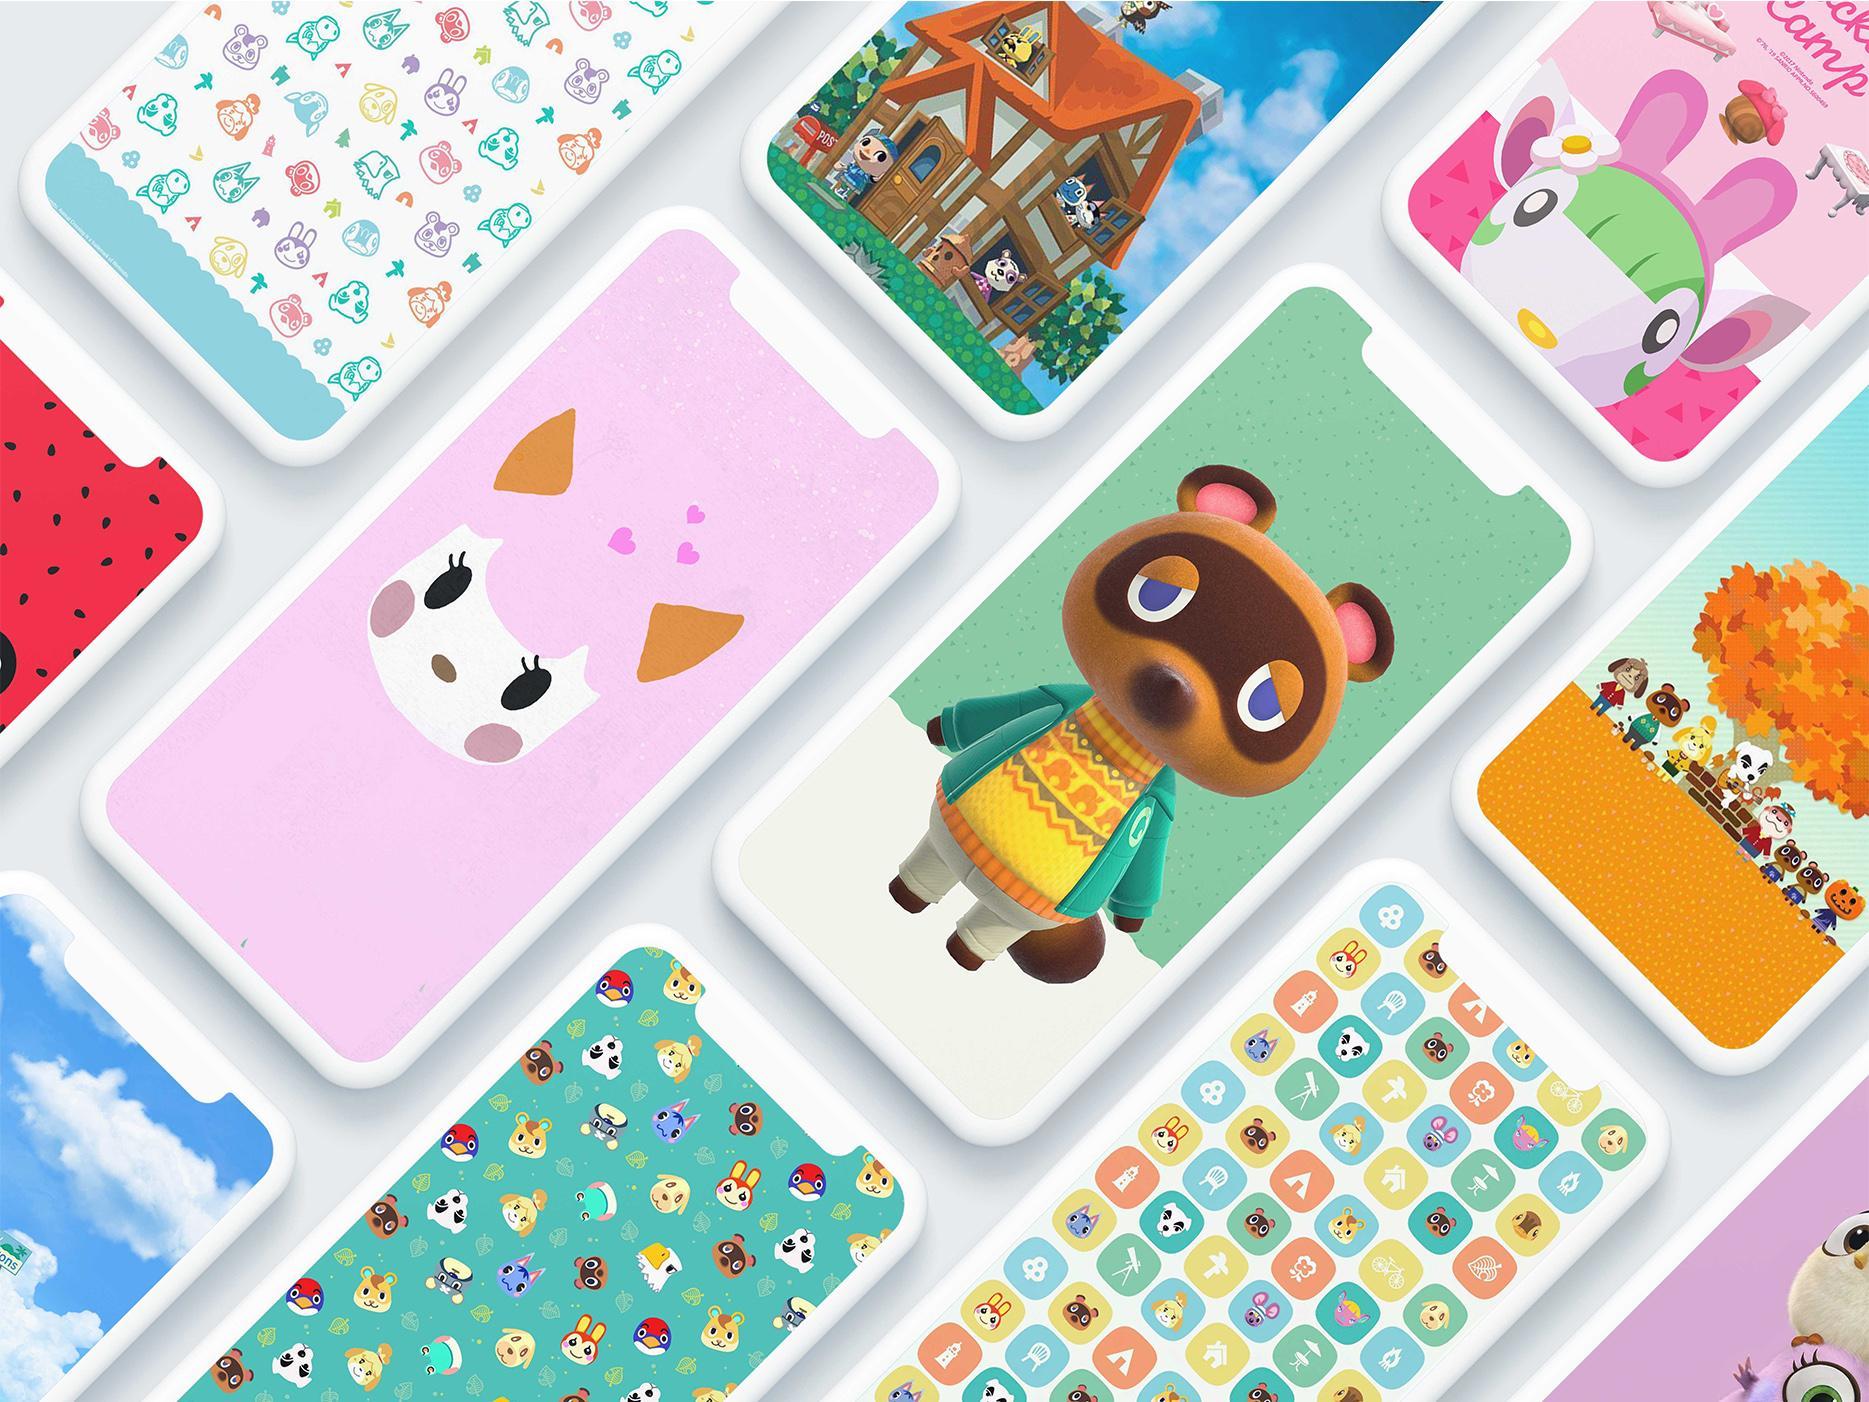 News Guides Fur Animal Crossing New Horizons De For Android Apk Download